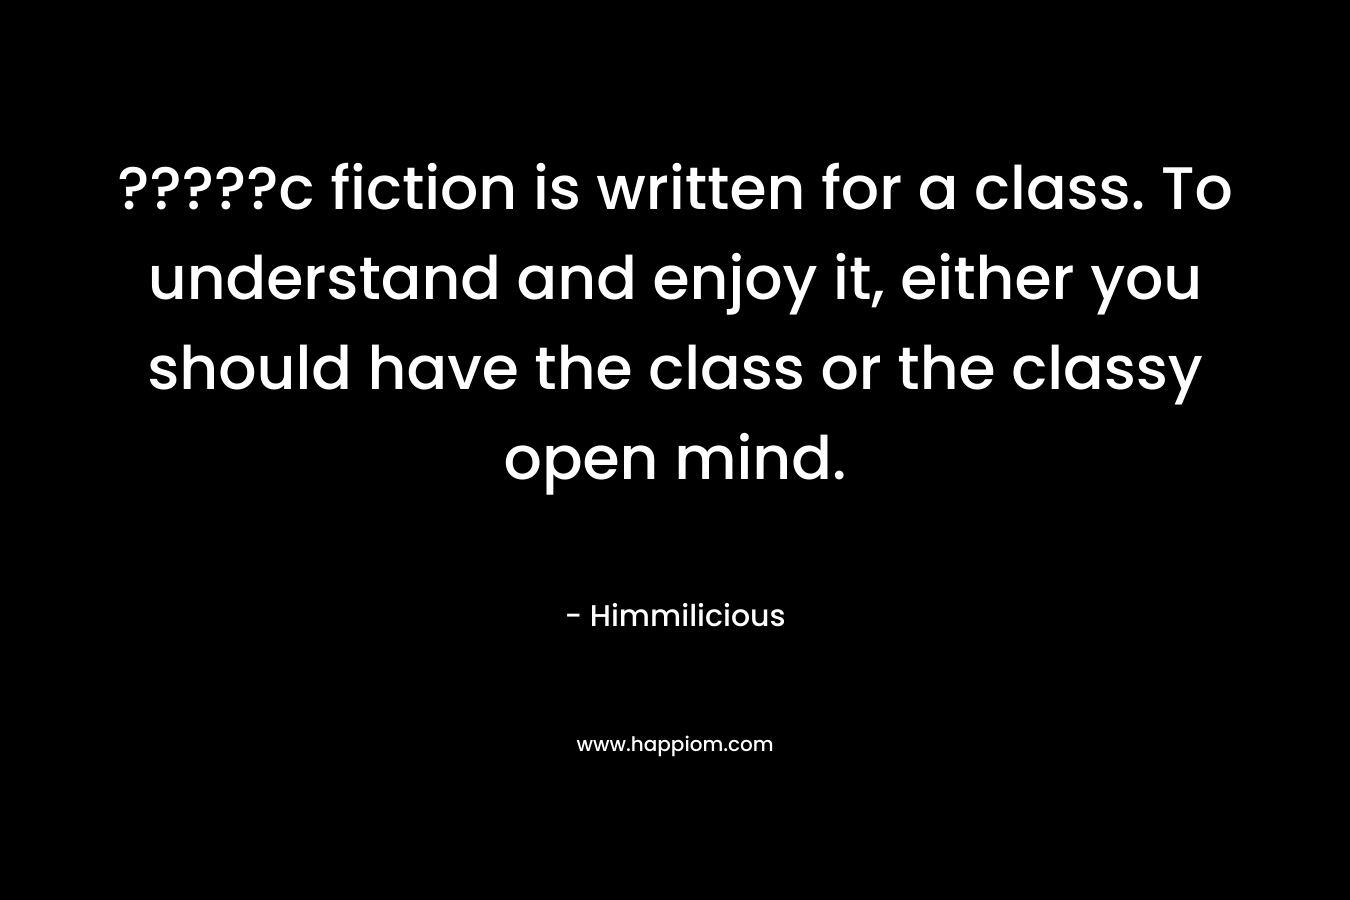 ?????c fiction is written for a class. To understand and enjoy it, either you should have the class or the classy open mind.